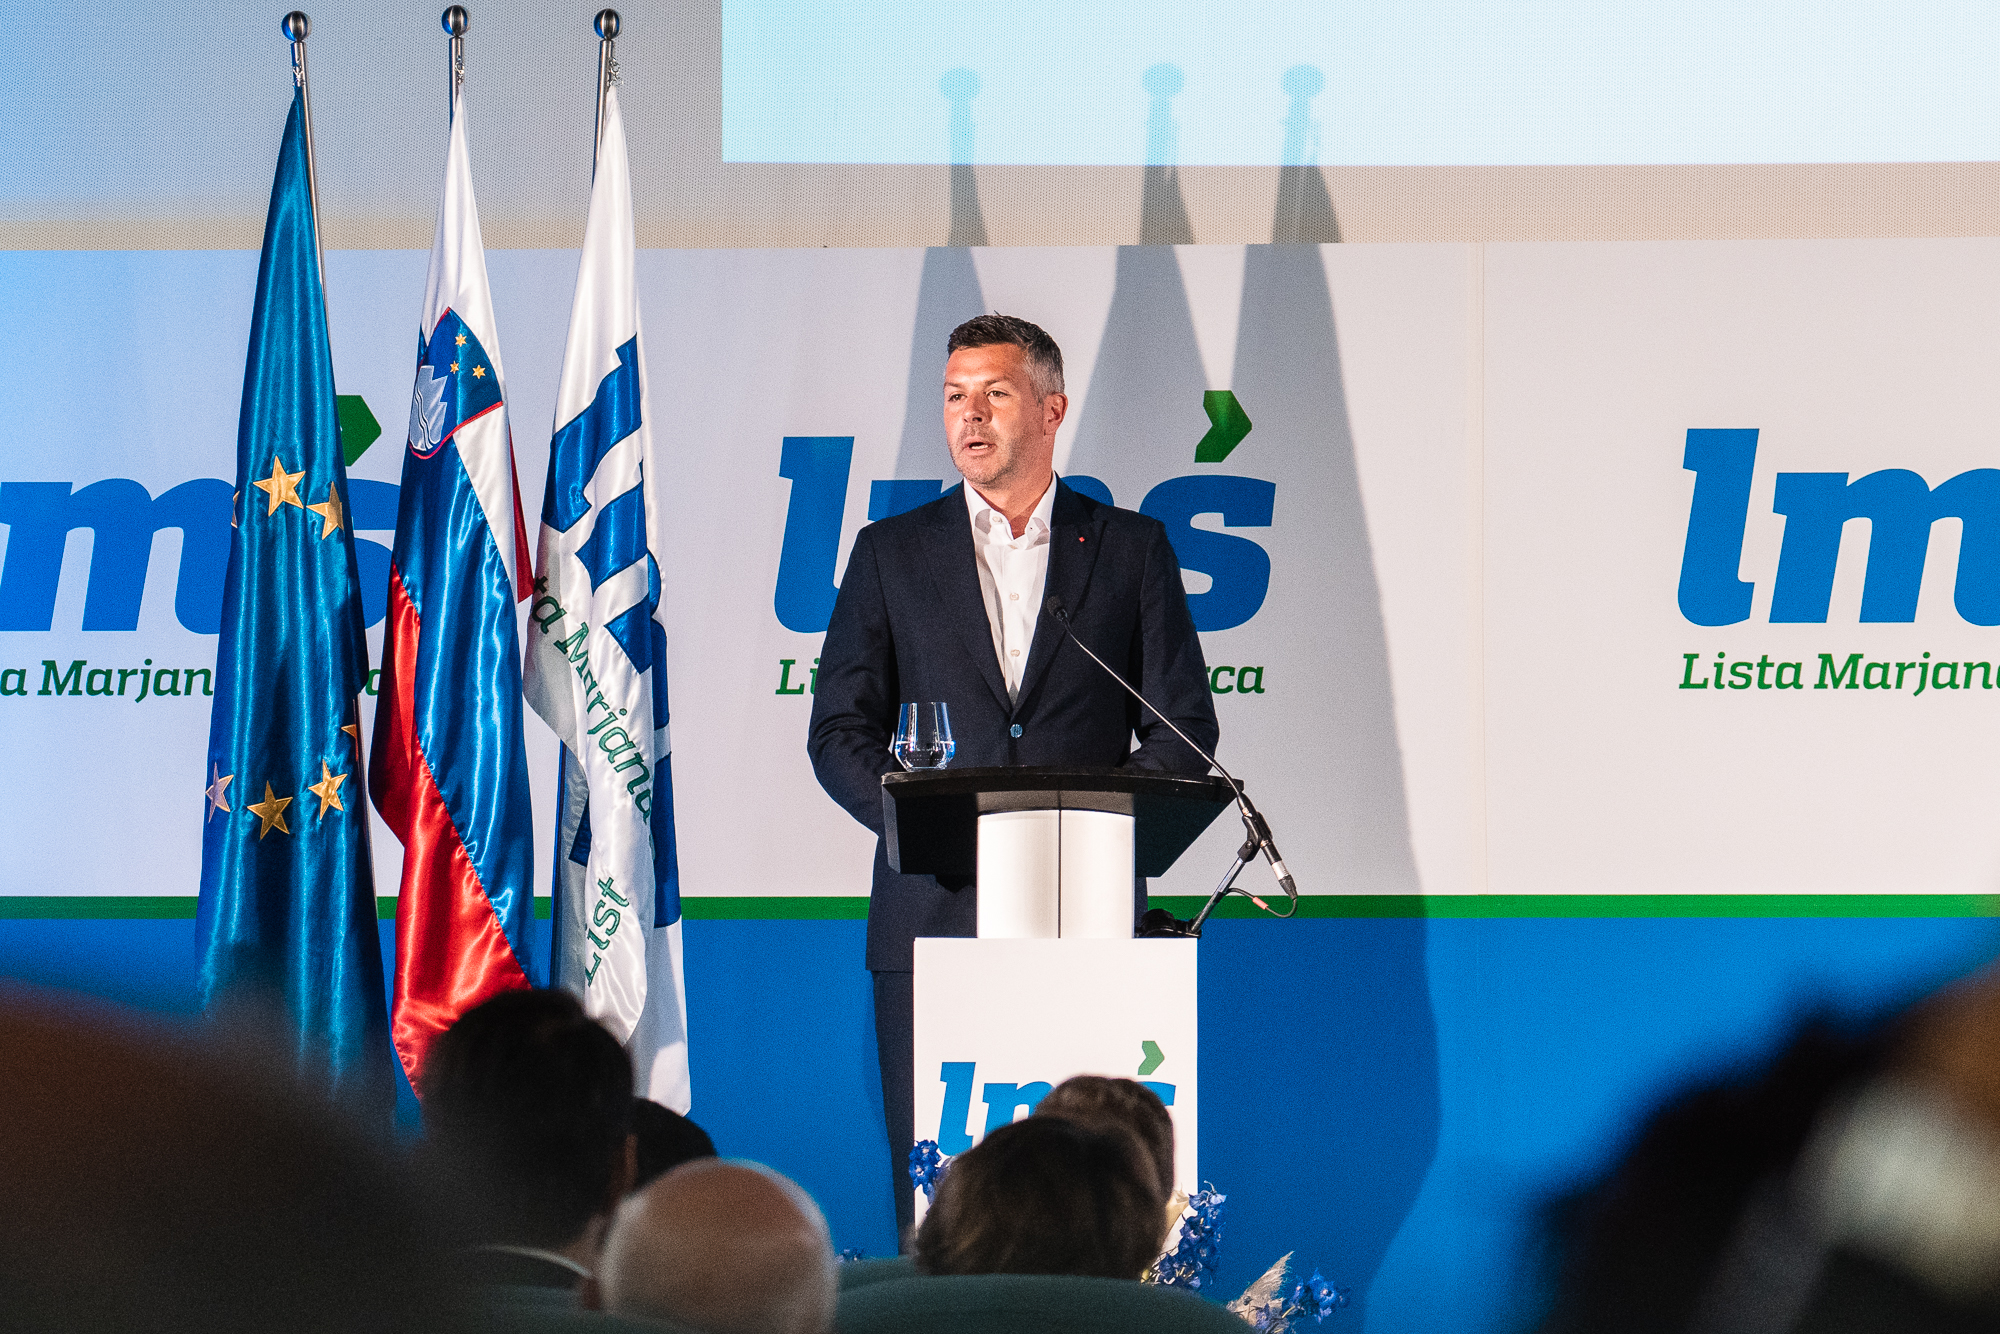 Matjaž Nemec, Vice-President of Social democratic Party of Slovenia, on the stage at the Fifth Congress of Lista Marjana Šarca